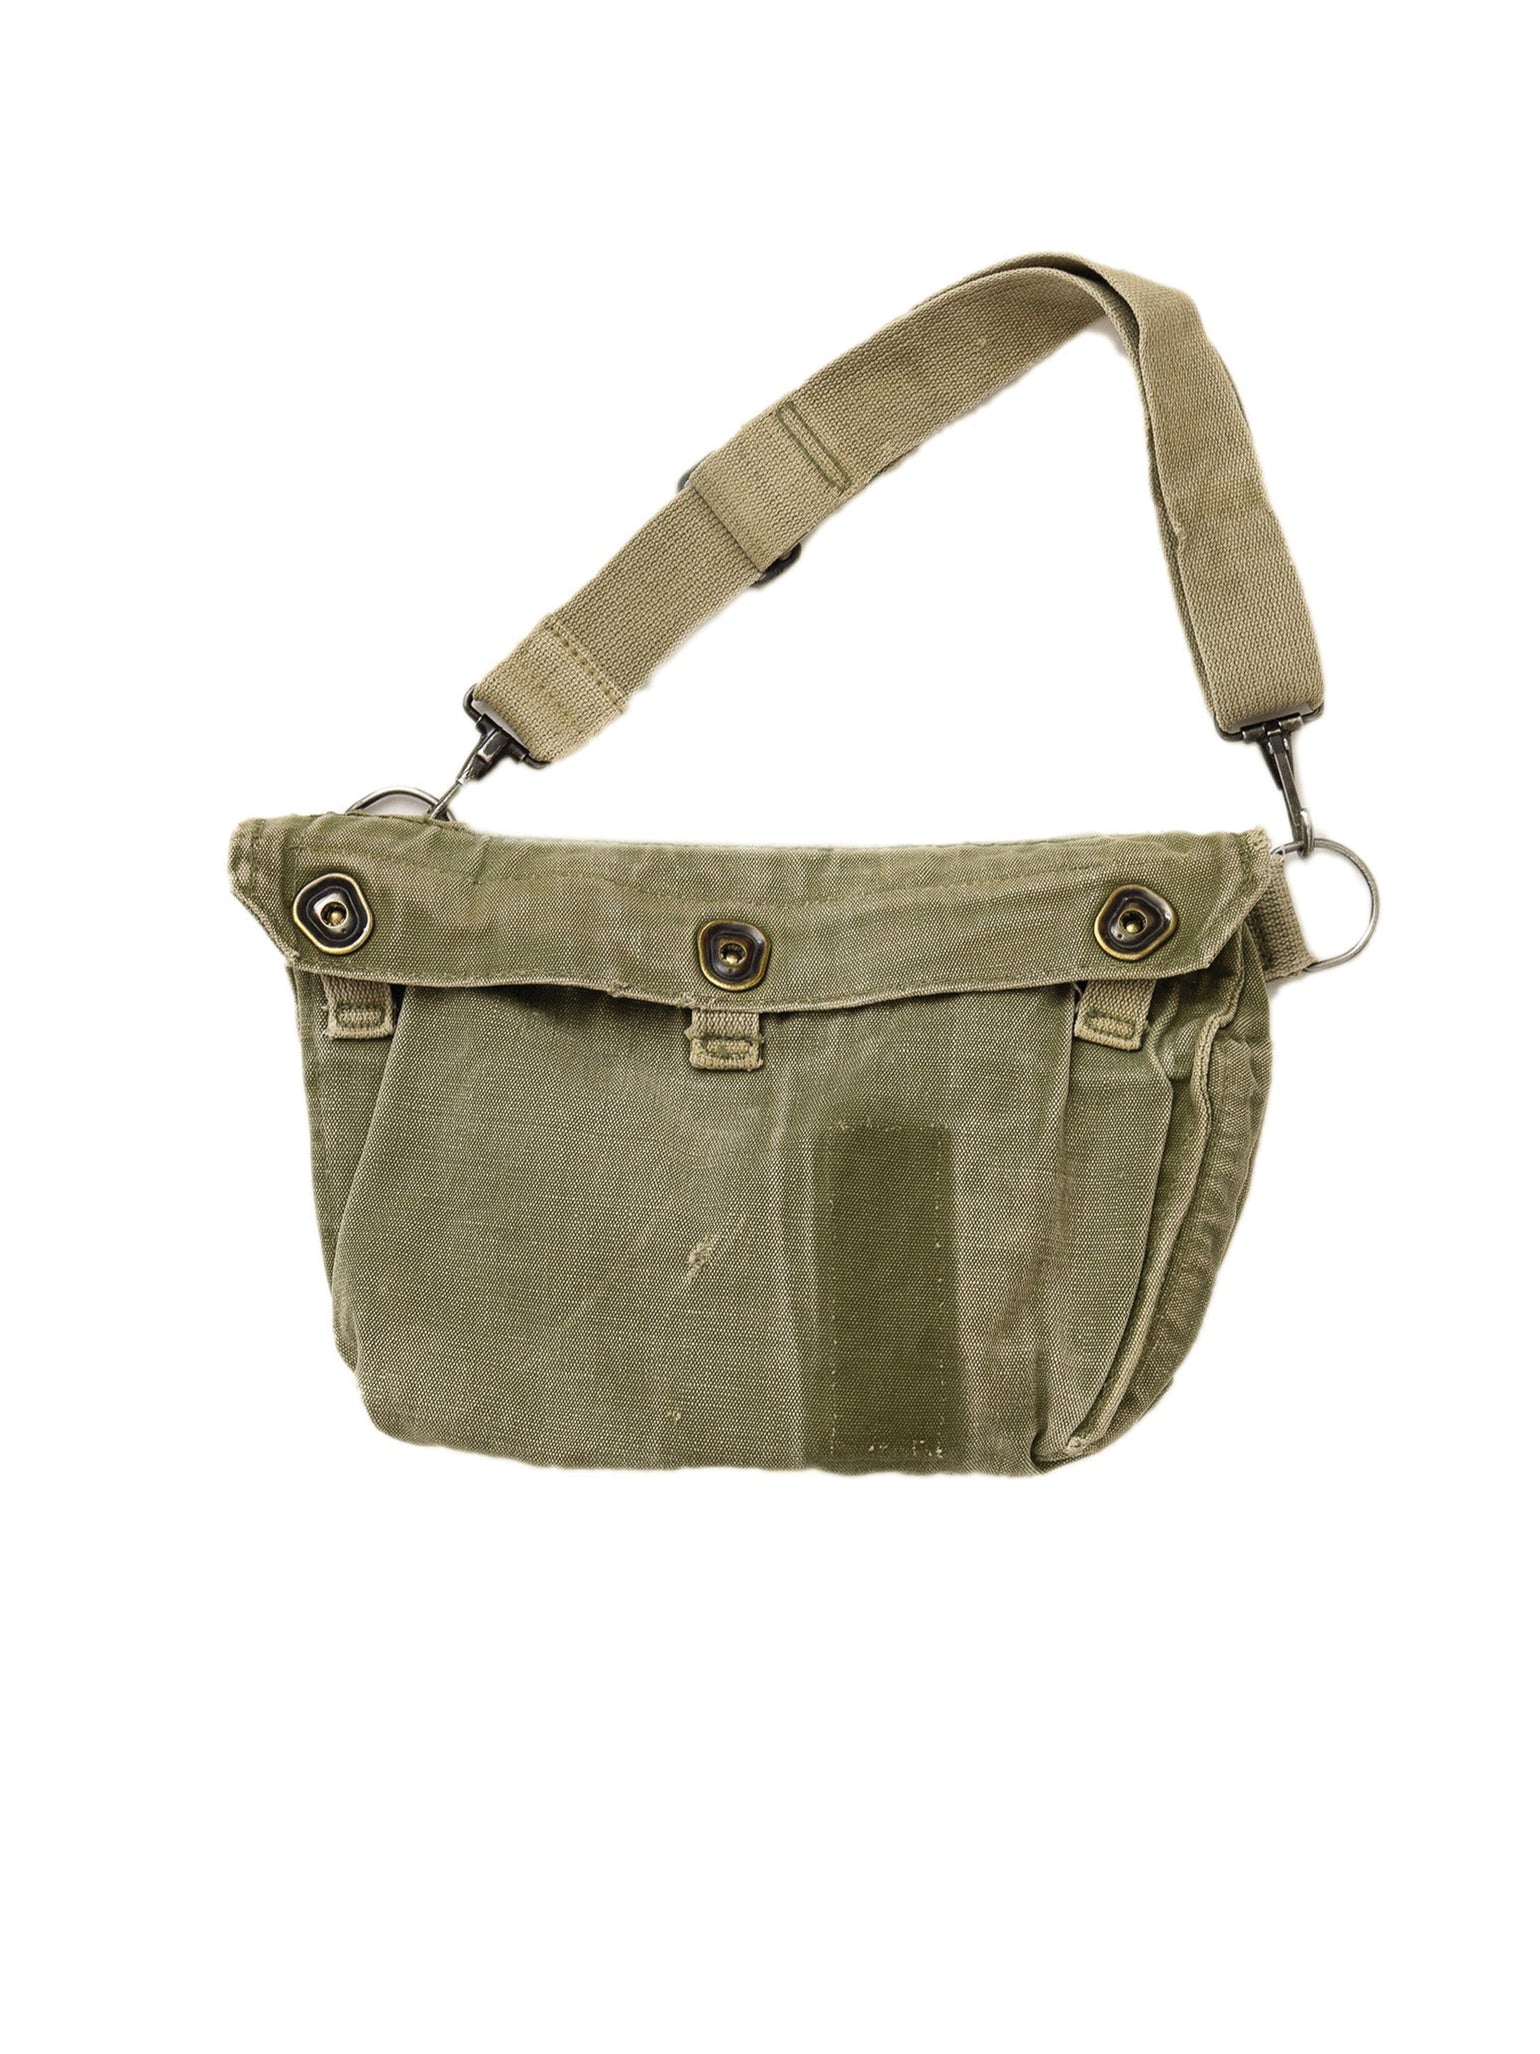 Repurposed Utility Fanny Pack – Artisan-Collage